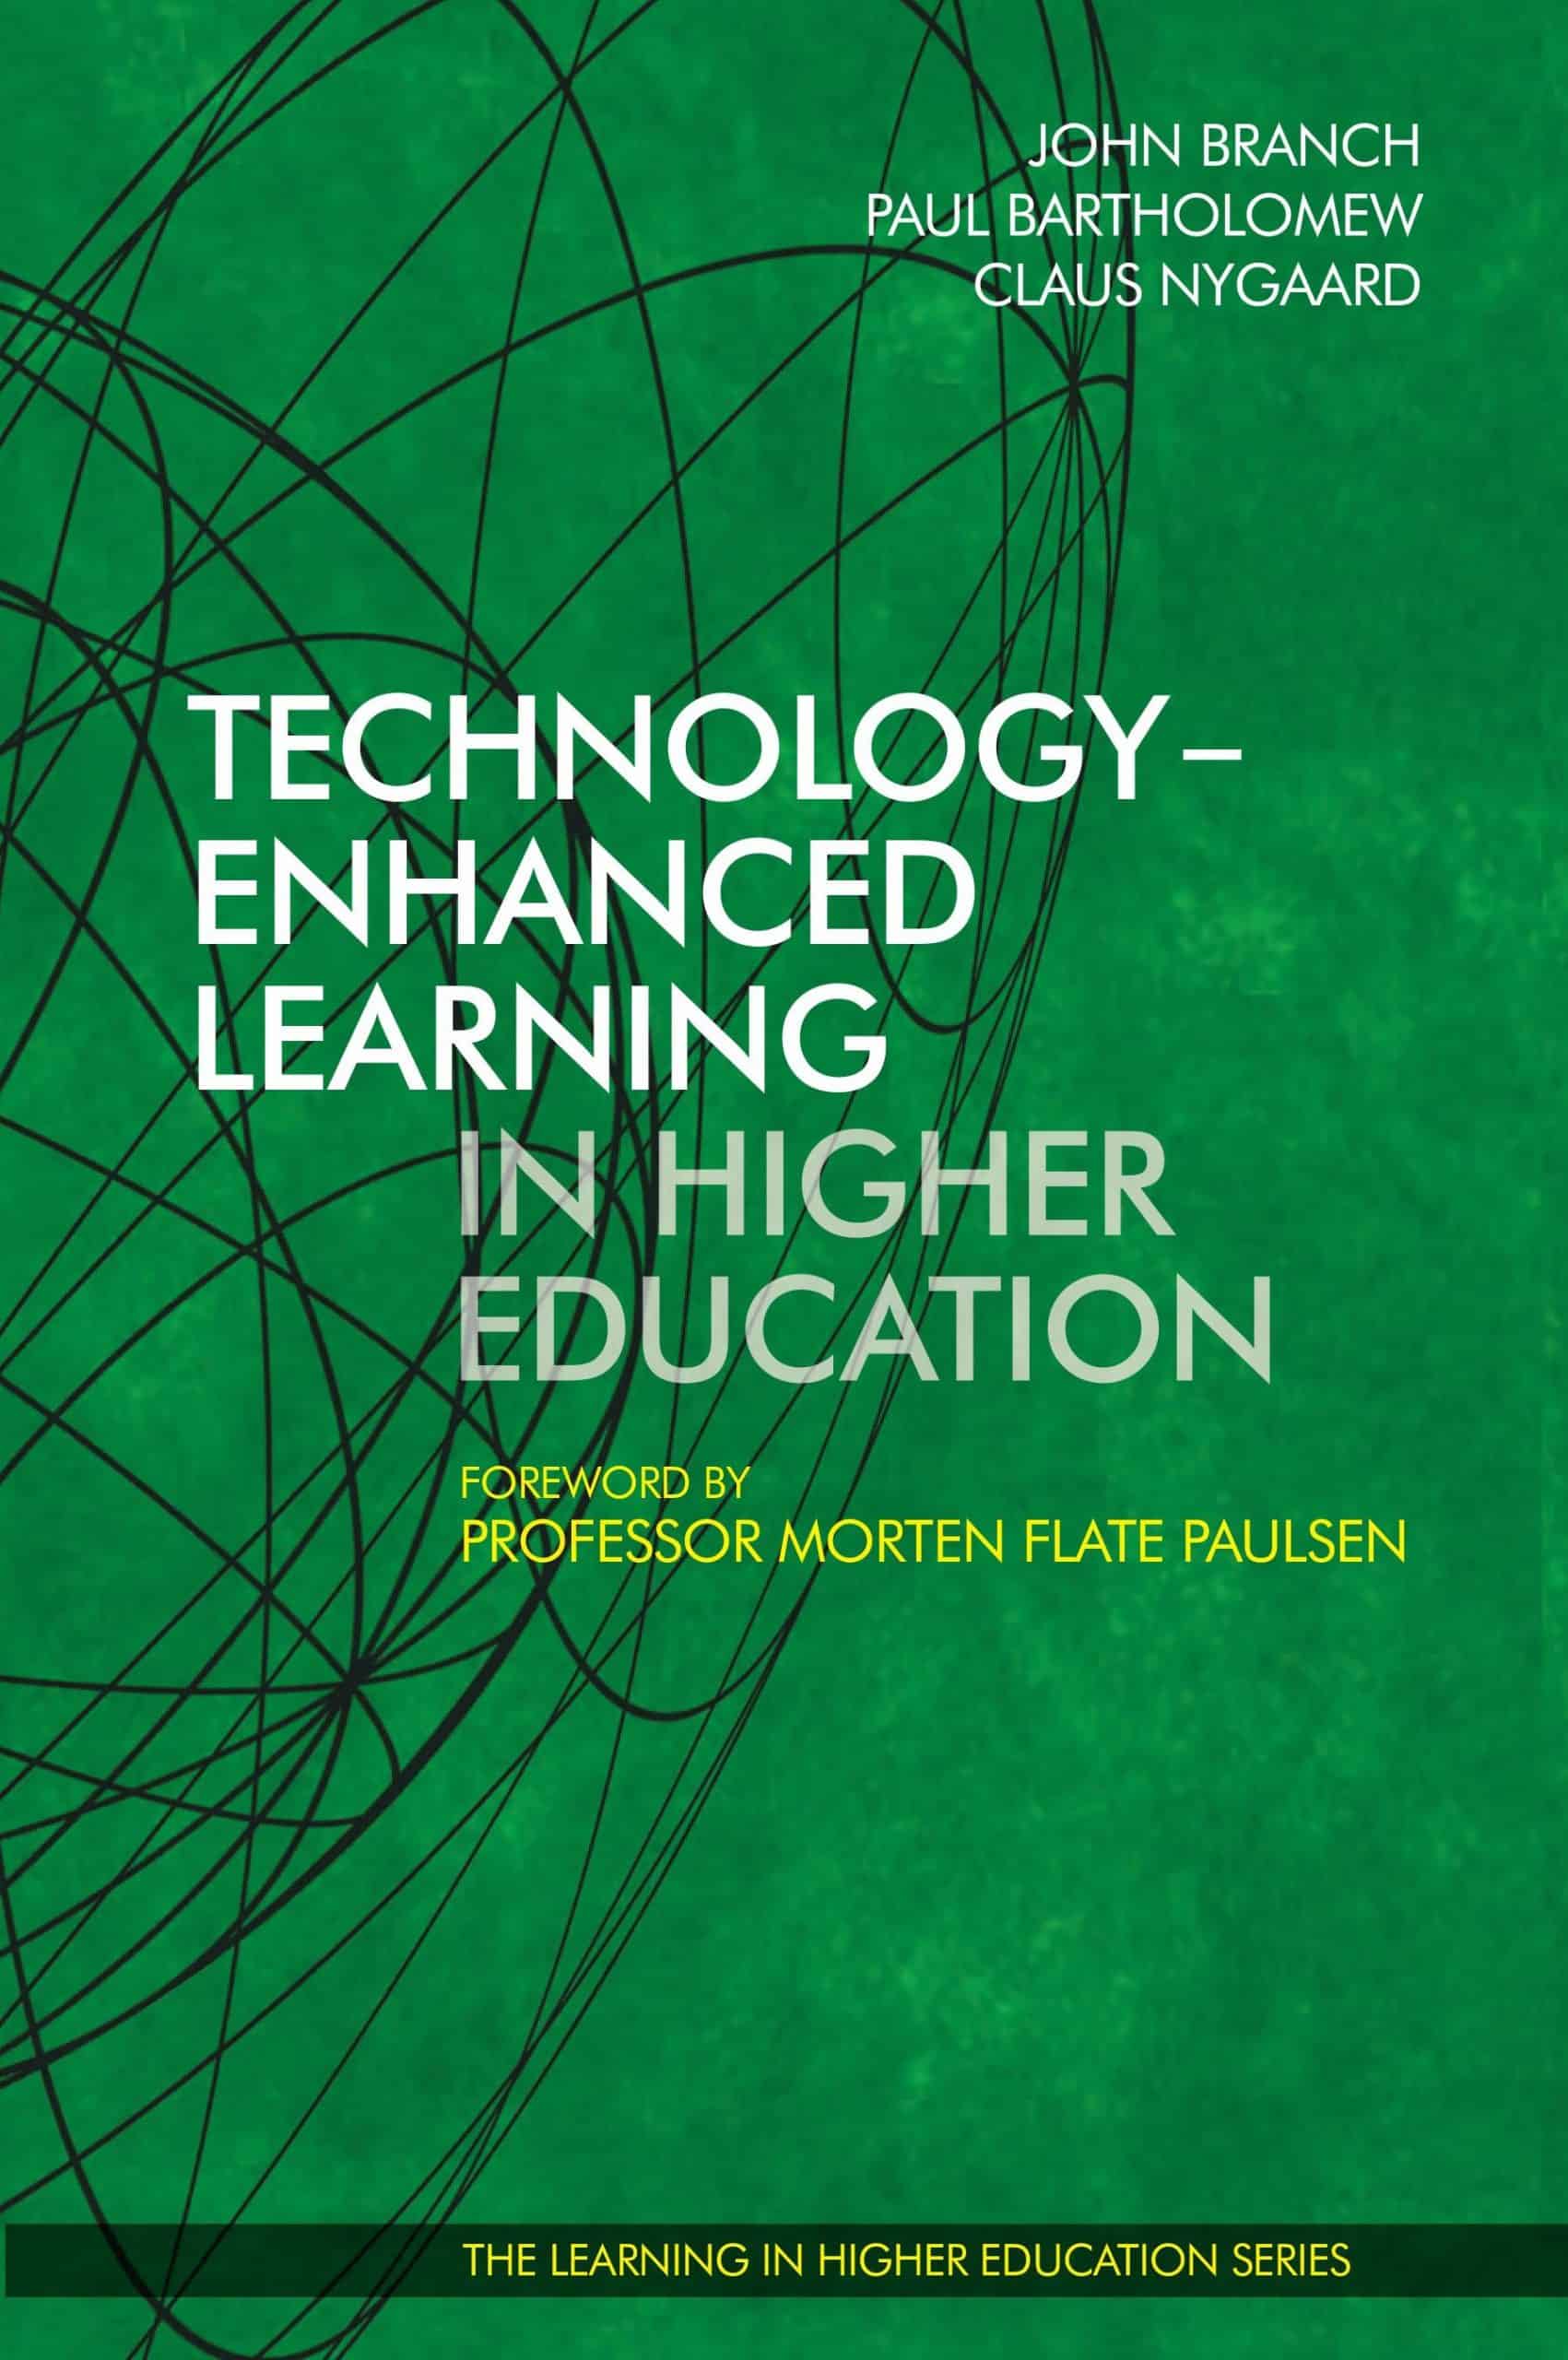 Learning　in　Education　Education　Higher　for　Learning　(BOOK)　Higher　Technology-Enhanced　(LiHE)　in　Institute